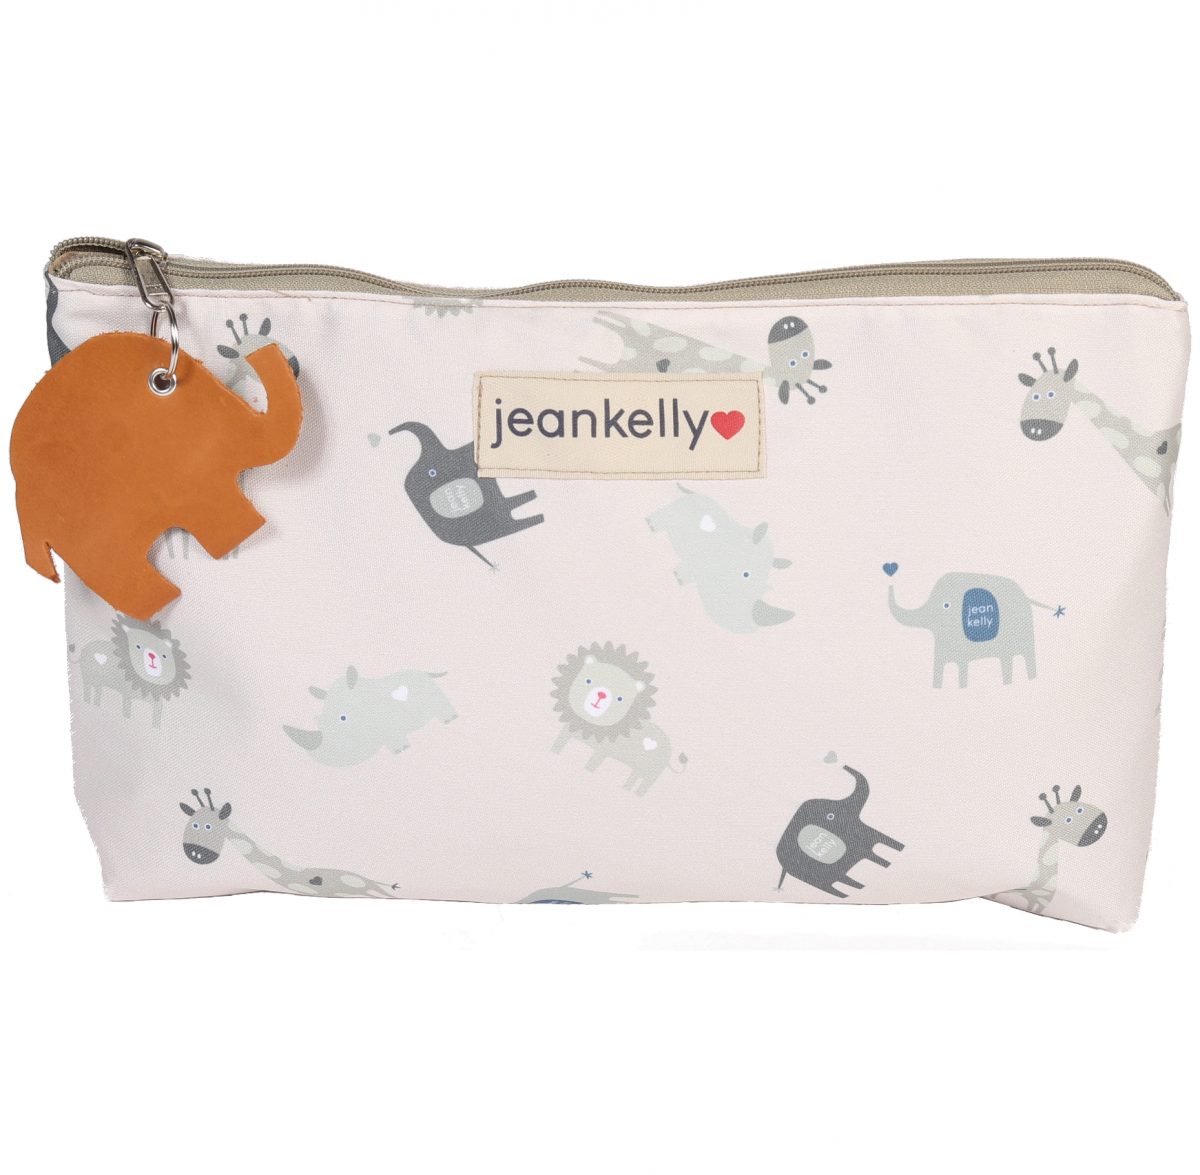 jeankelly quality leather baby bags & accessories